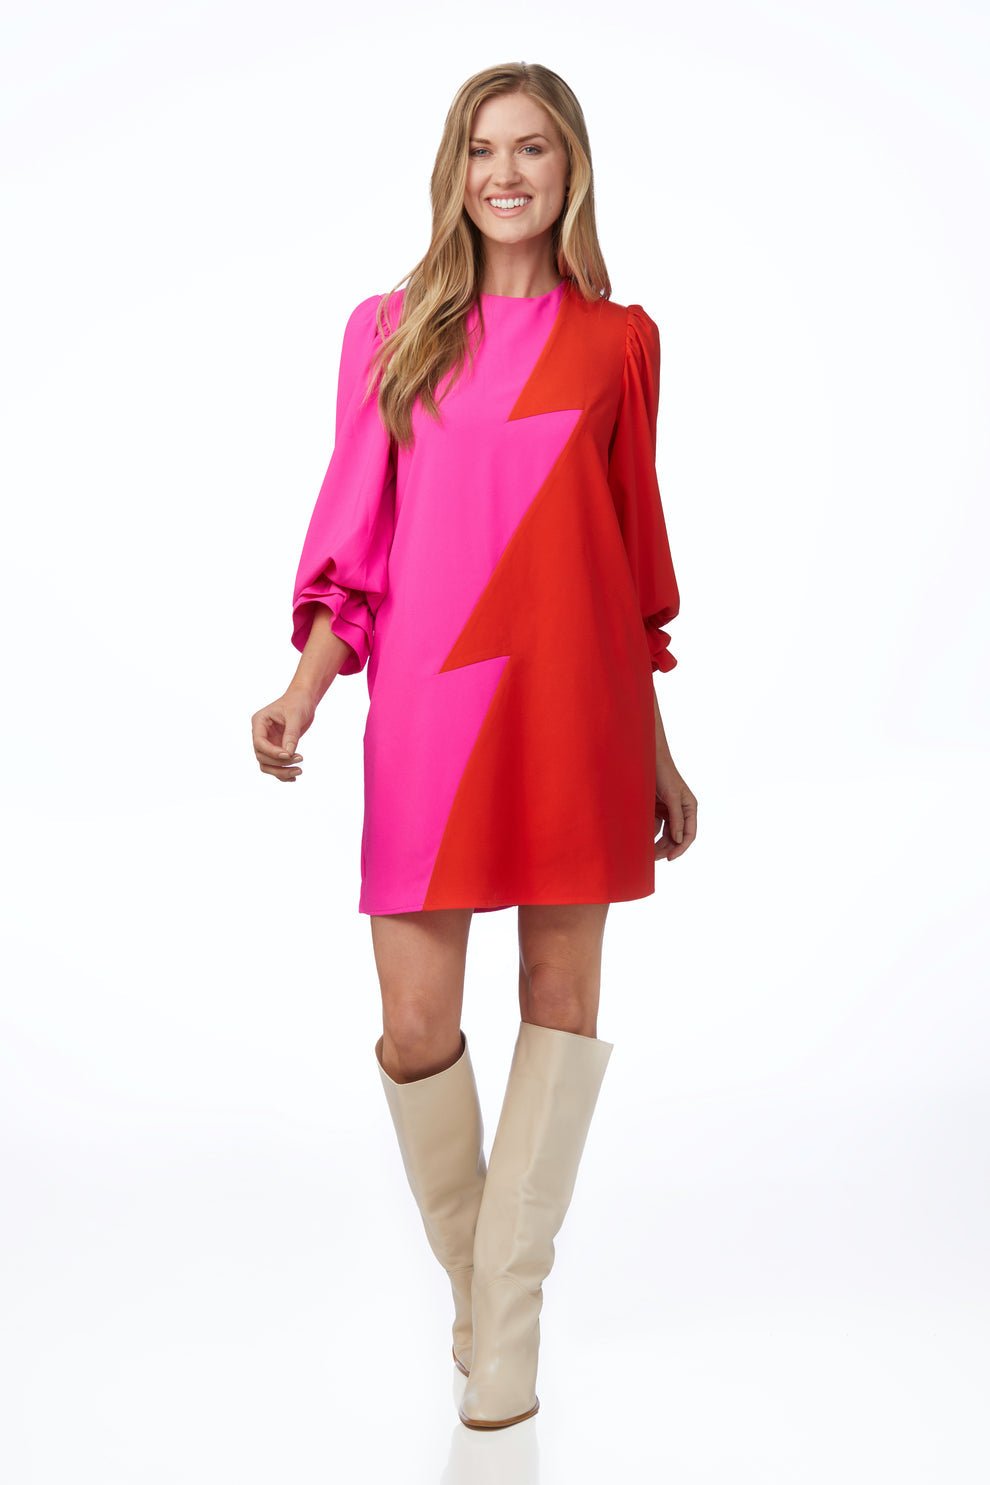 Crosby - Meaghan L/S Dress: Mollie Pink/Orange - Shorely Chic Boutique